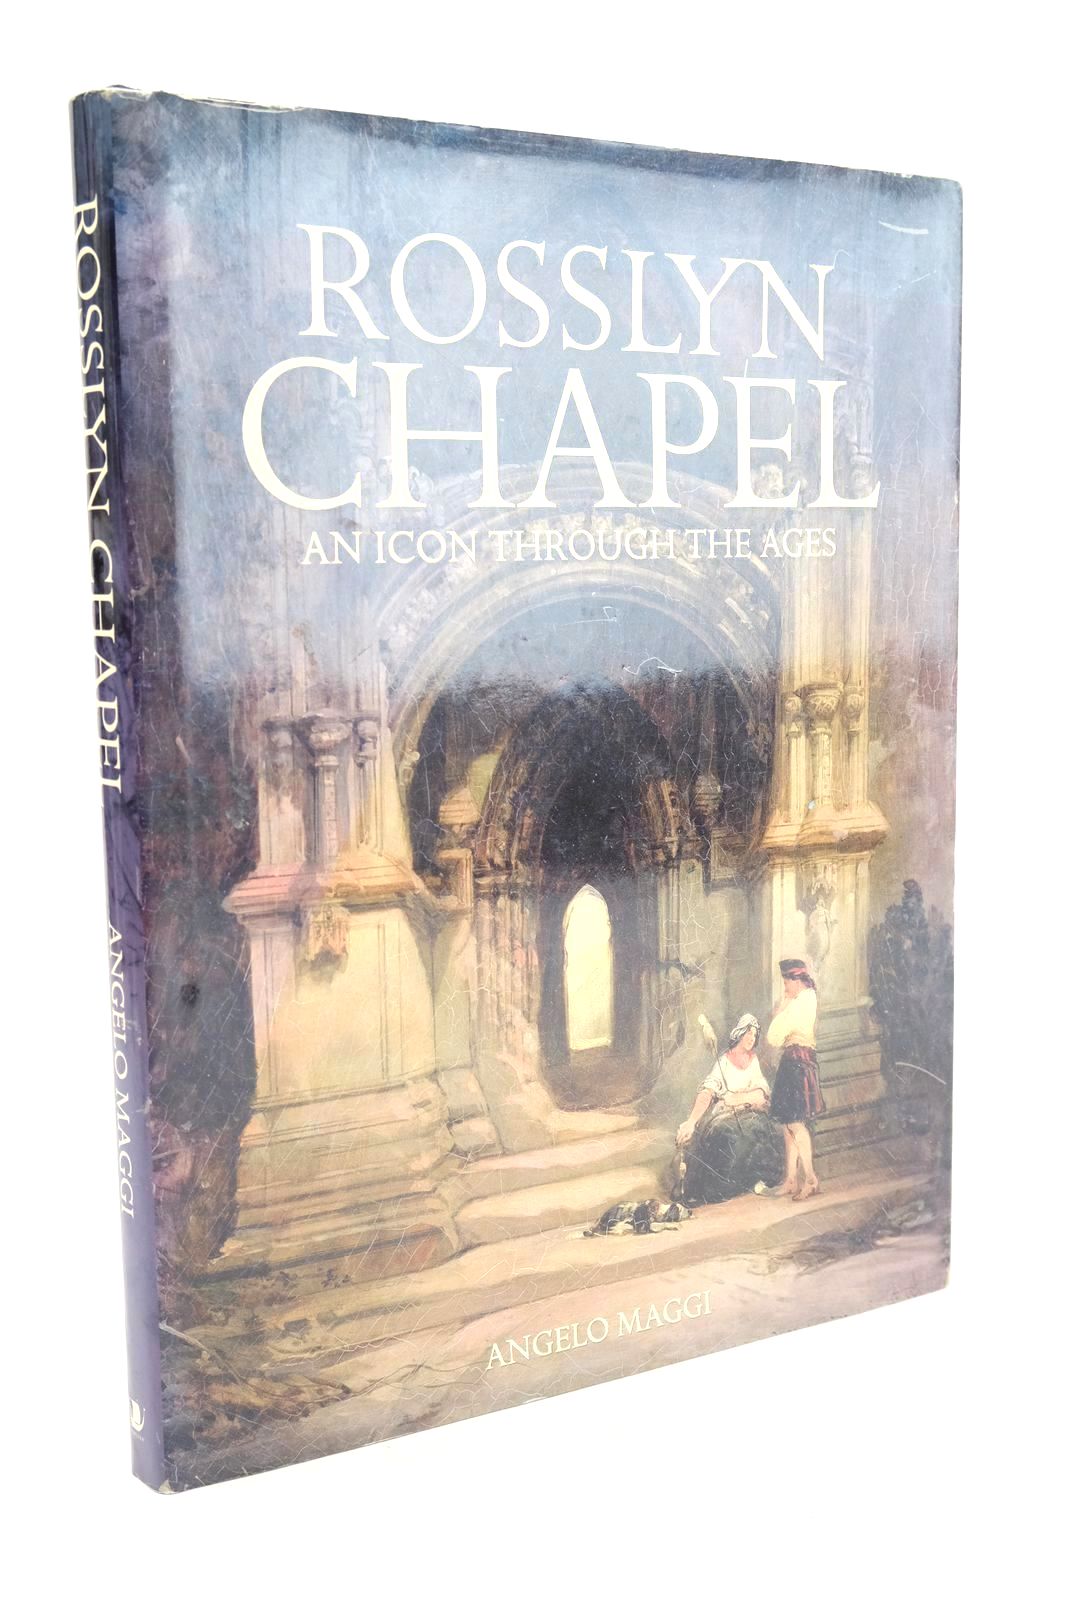 Photo of ROSSLYN CHAPEL AN ICON THROUGH THE AGES written by Maggi, Angelo published by Birlinn Limited (STOCK CODE: 1325306)  for sale by Stella & Rose's Books